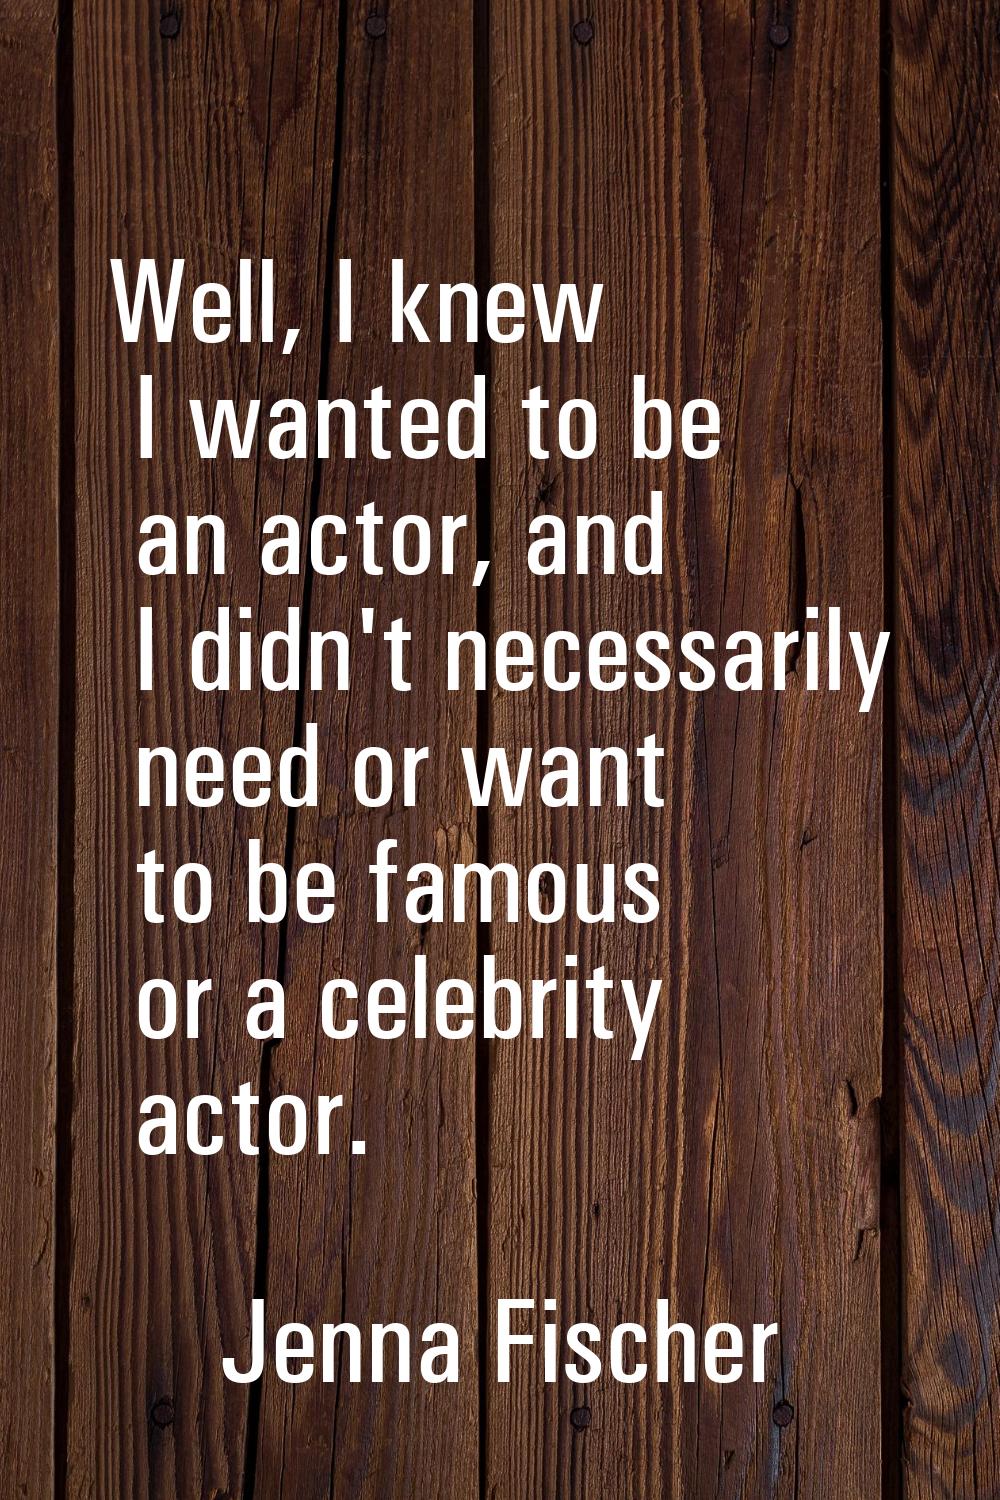 Well, I knew I wanted to be an actor, and I didn't necessarily need or want to be famous or a celeb